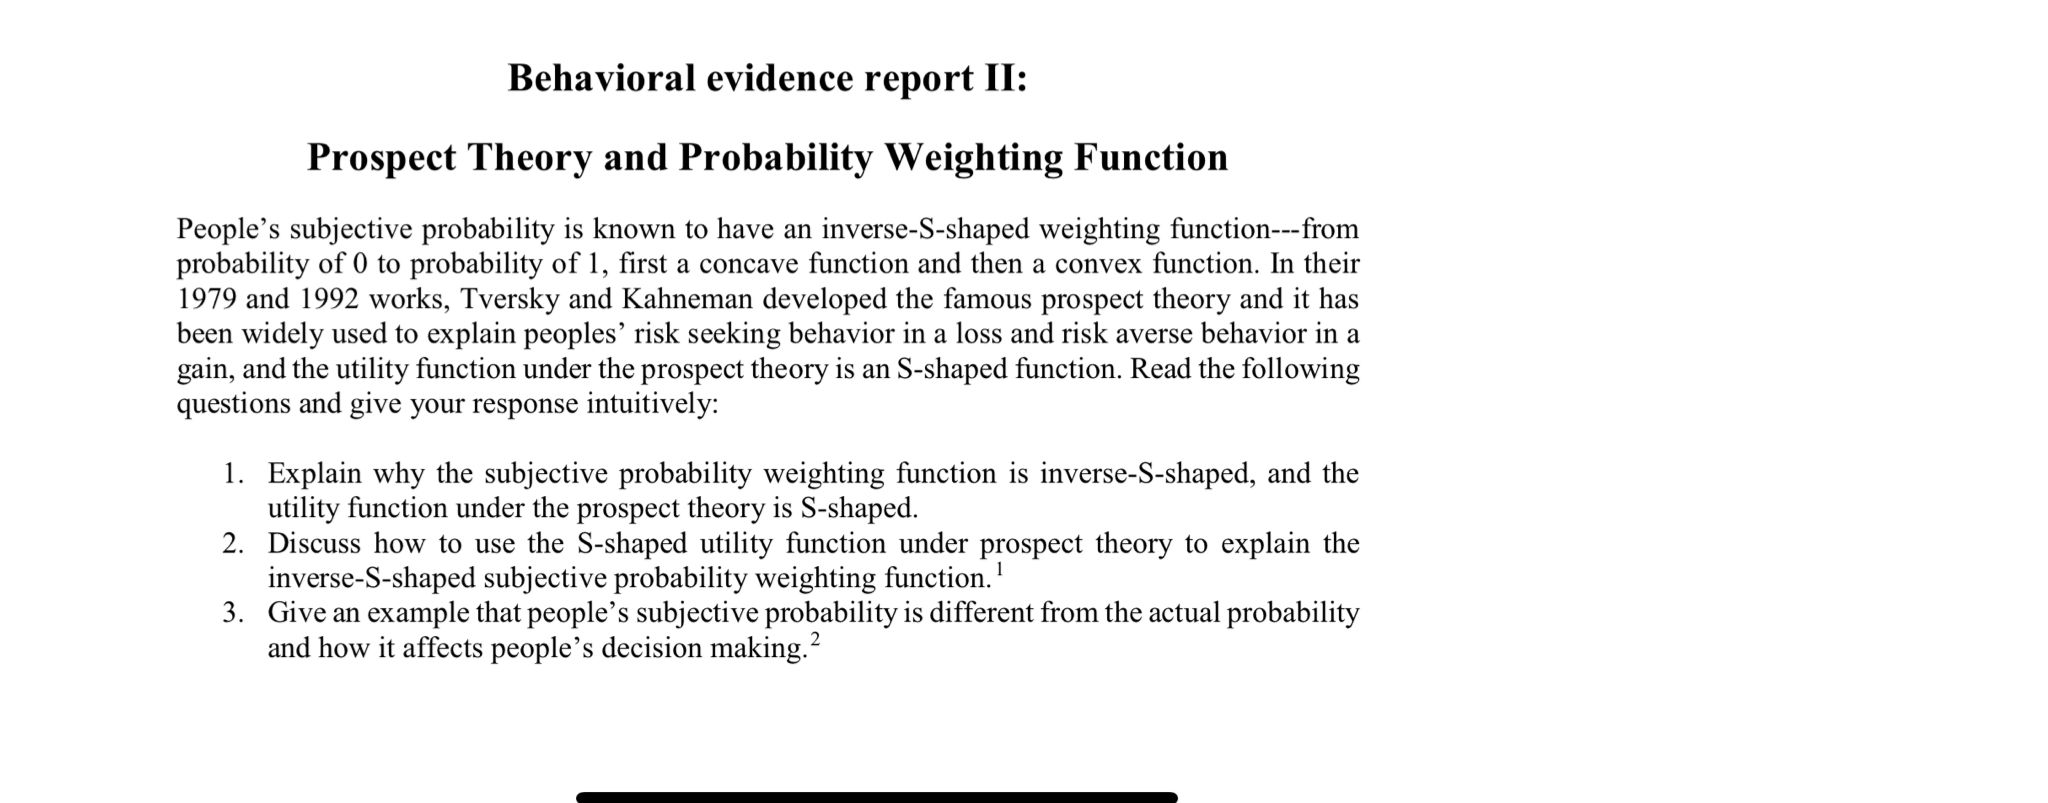 Kahneman and Tversky's S-Shaped Utility Function